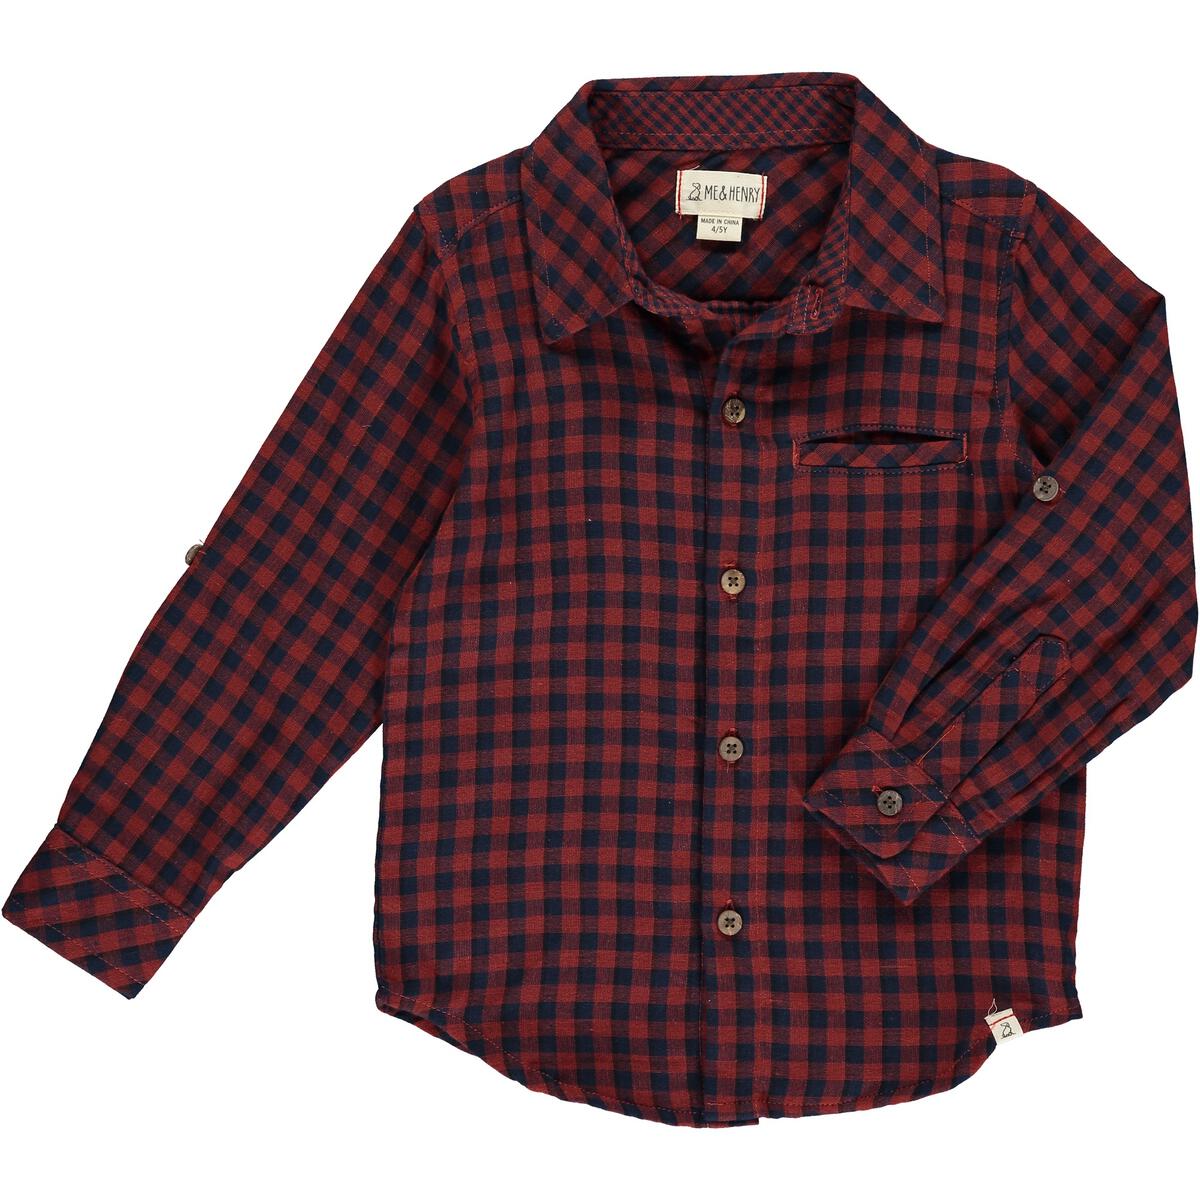 rust/navy atwood plaid woven shirt